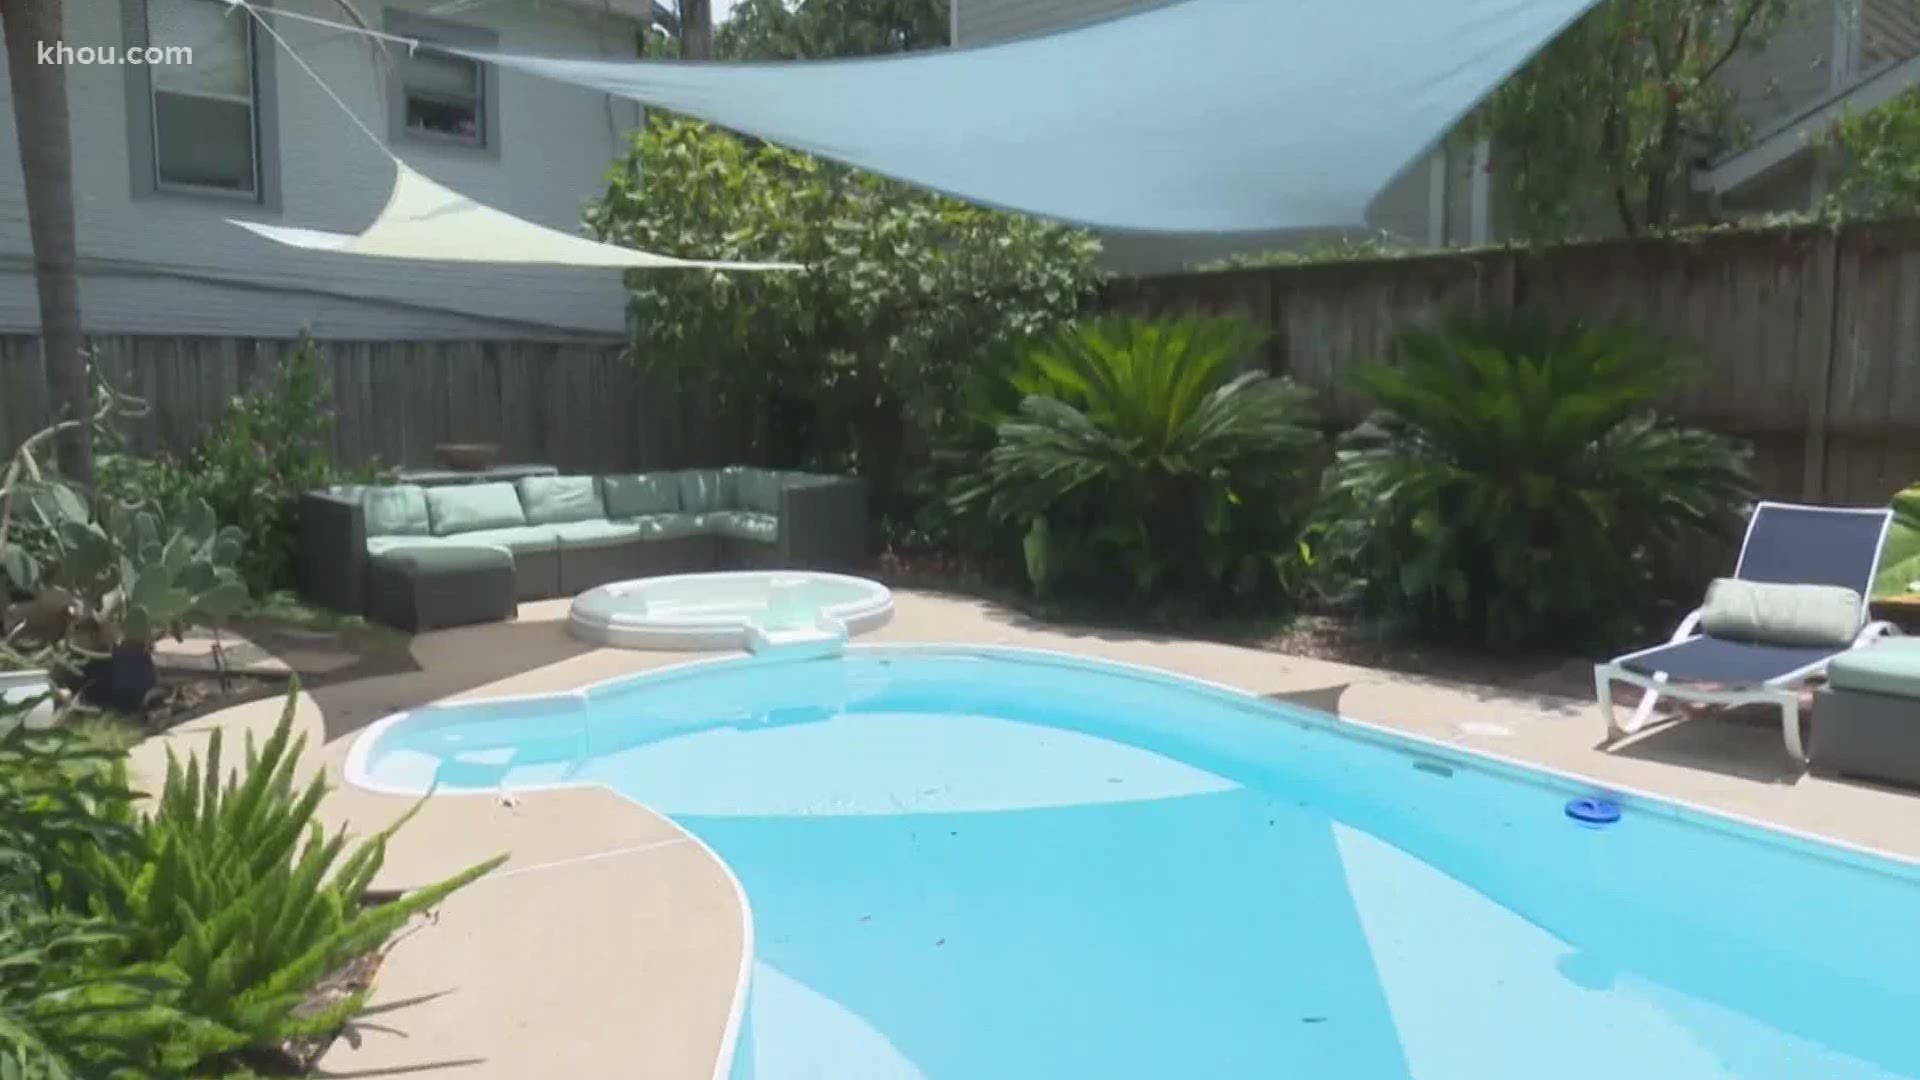 Between stay-home orders and state shutdowns, Houston homeowners are getting acquainted with their homes, and many are finding they need to upgrade their backyards.